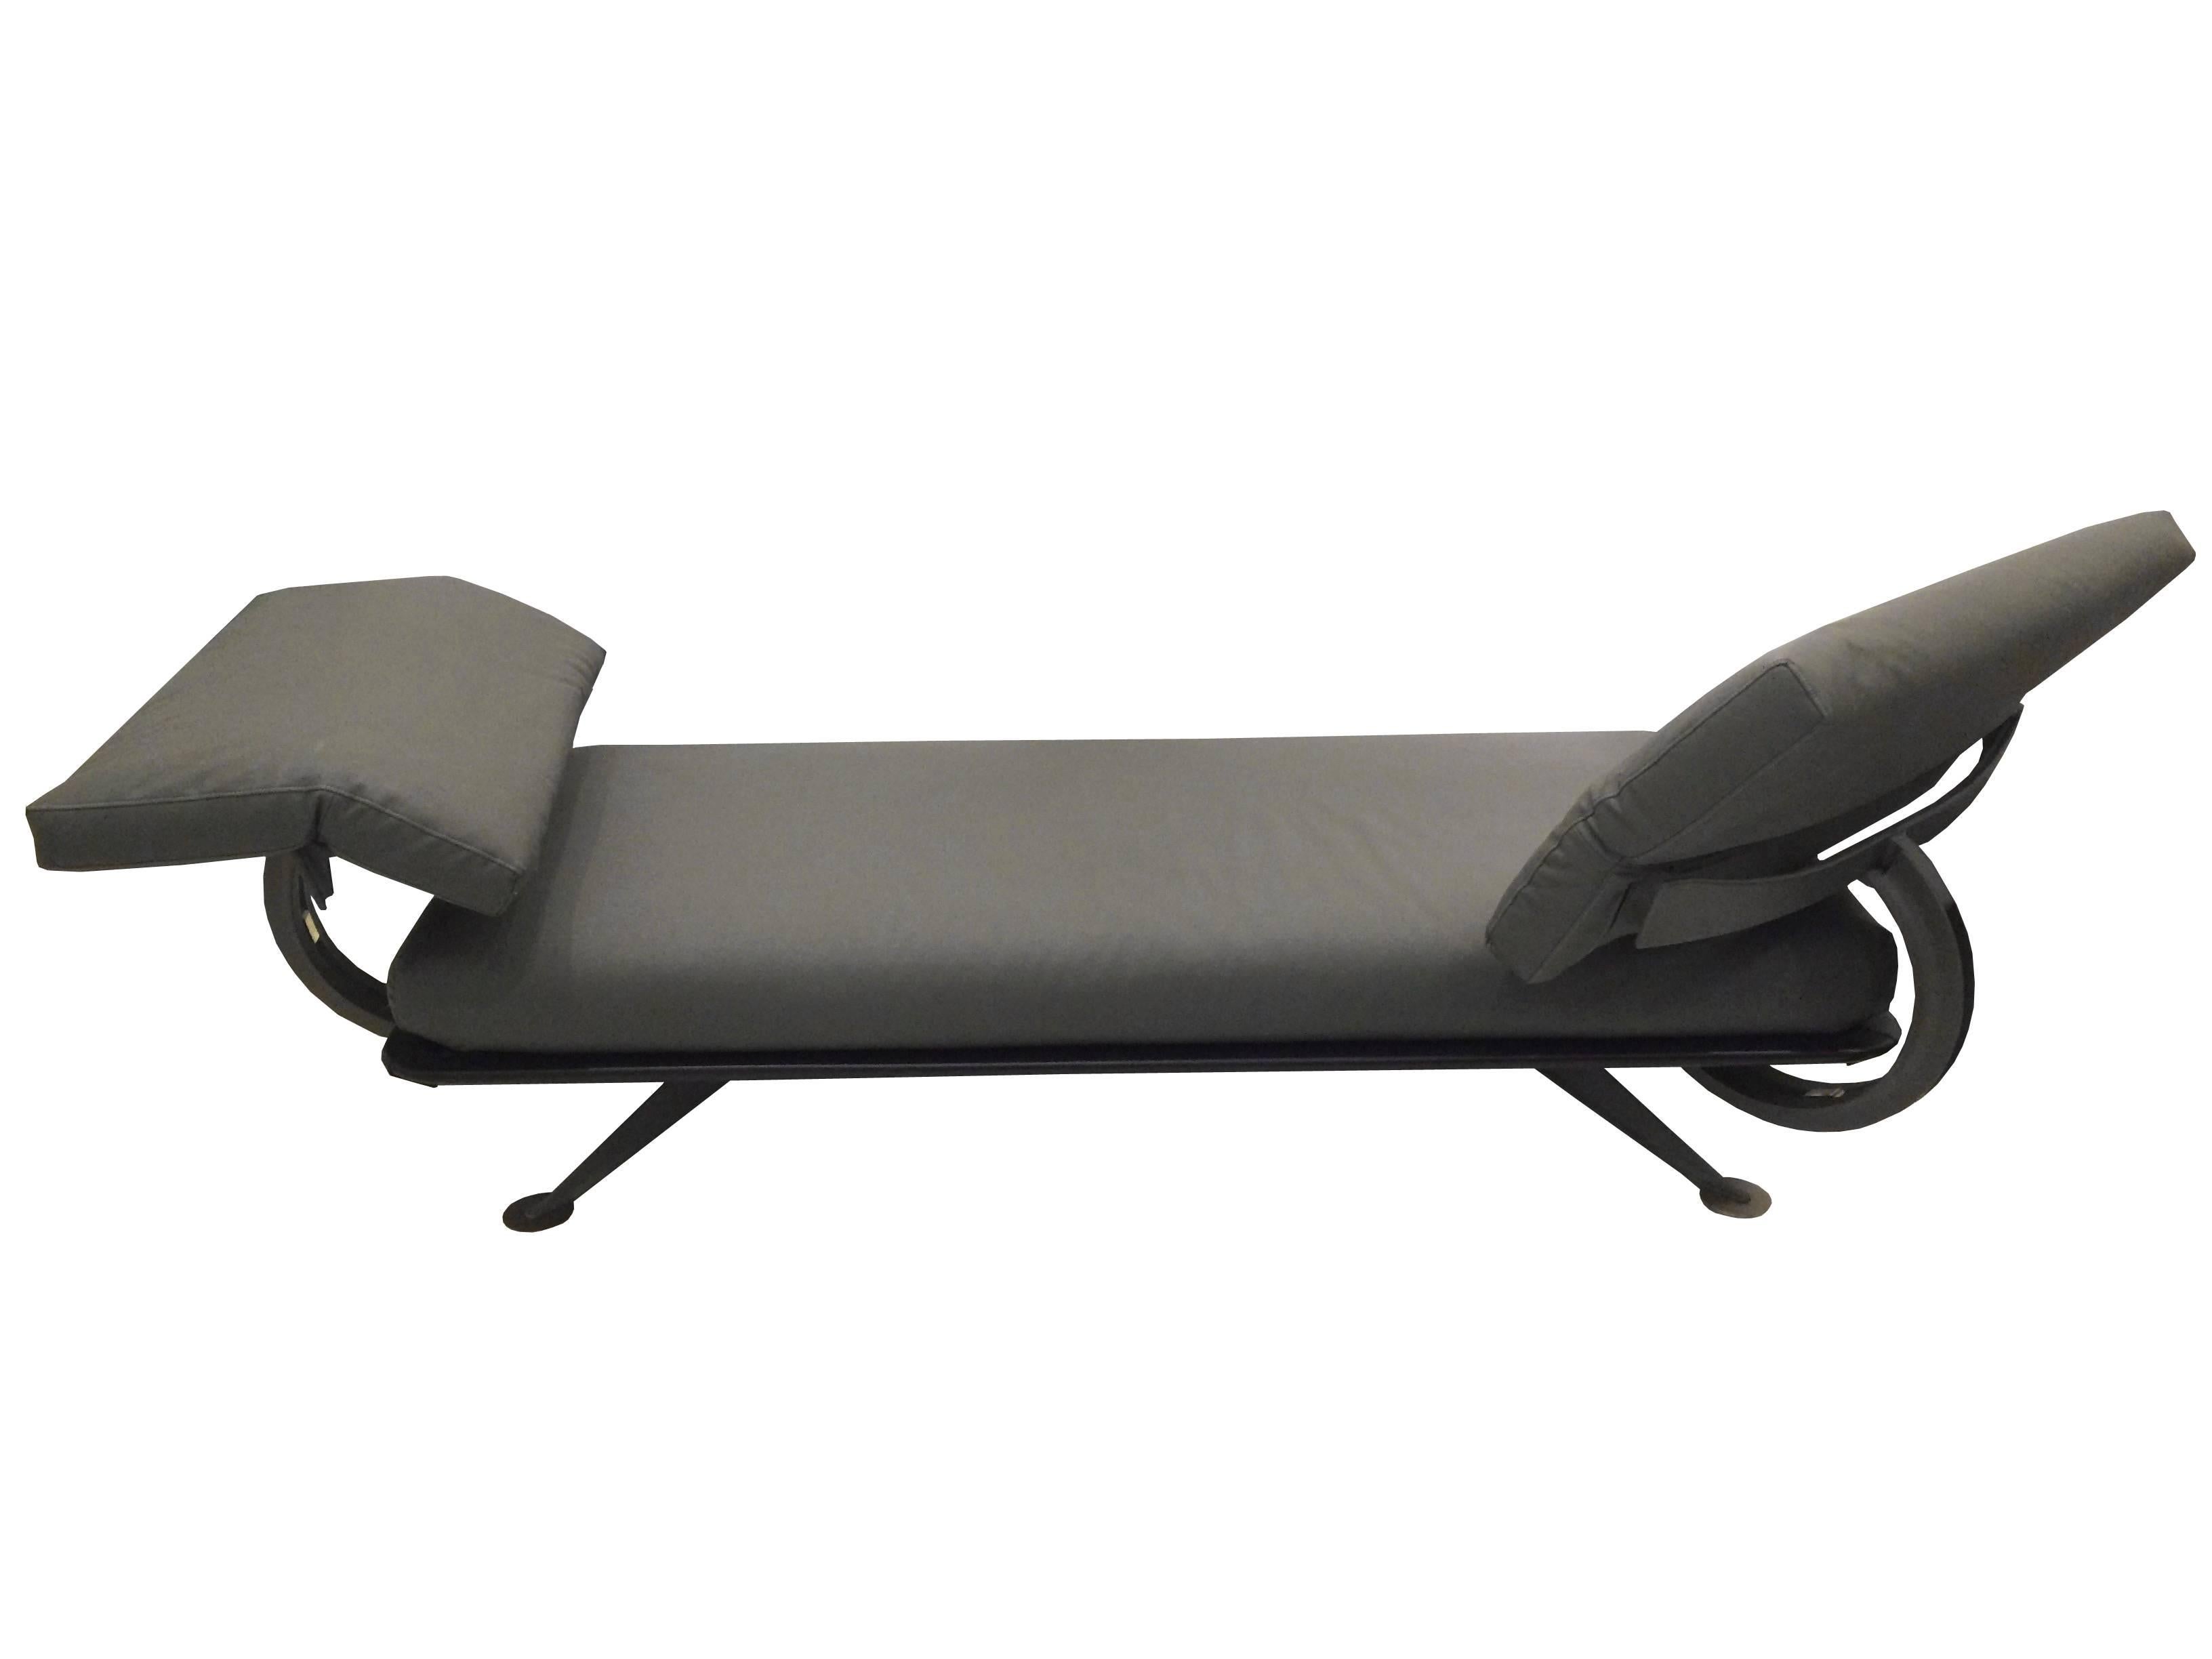 Post-Modern Couch Daybed Divan Adia by Paolo Piva for B&B Italia with adjustable backrest